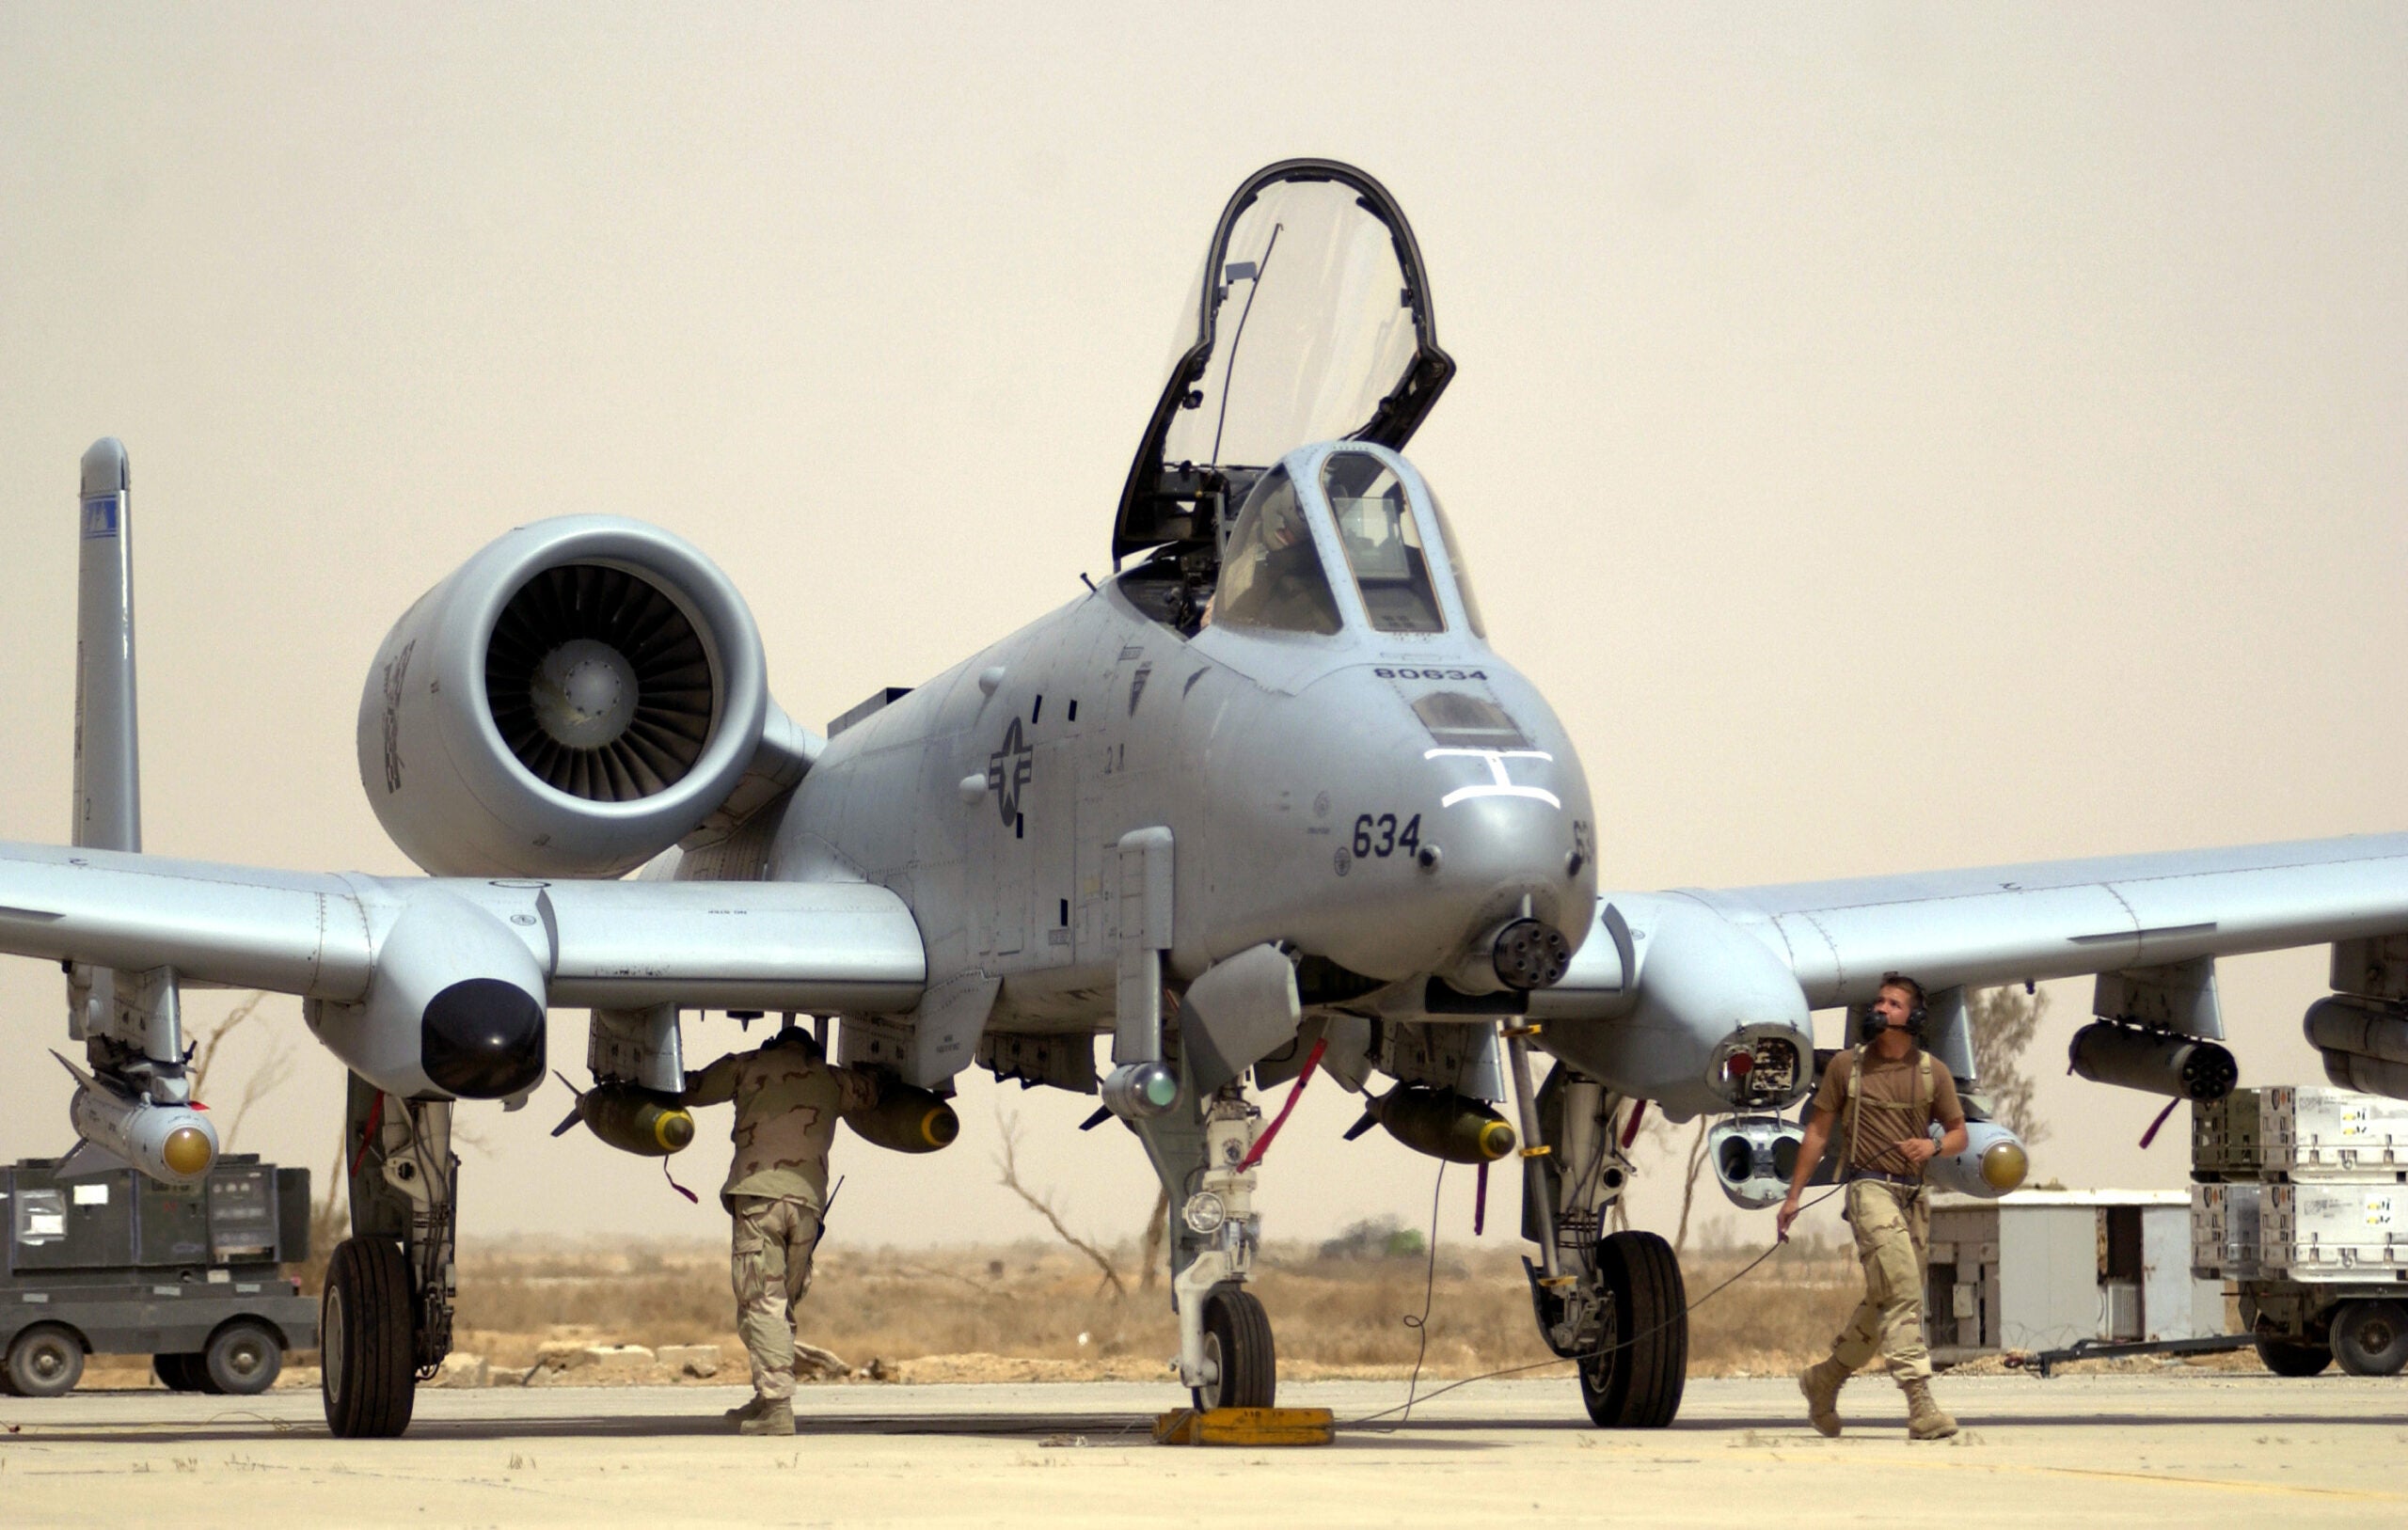 OPERATION IRAQI FREEDOM  --  Crew chiefs with the 392nd Air Expeditionary Wing conduct pre-flight checks on an A-10 Thunderbolt II at a forward-deployed location supporting Operation Iraqi Freedom.  A-10s have been operating at an air base in southern Iraq for about a week, giving them more time over the battlefield because they expend less fuel getting to and from the front.  (U.S. Air Force photo by Staff Sgt. Shane A. Cuomo)